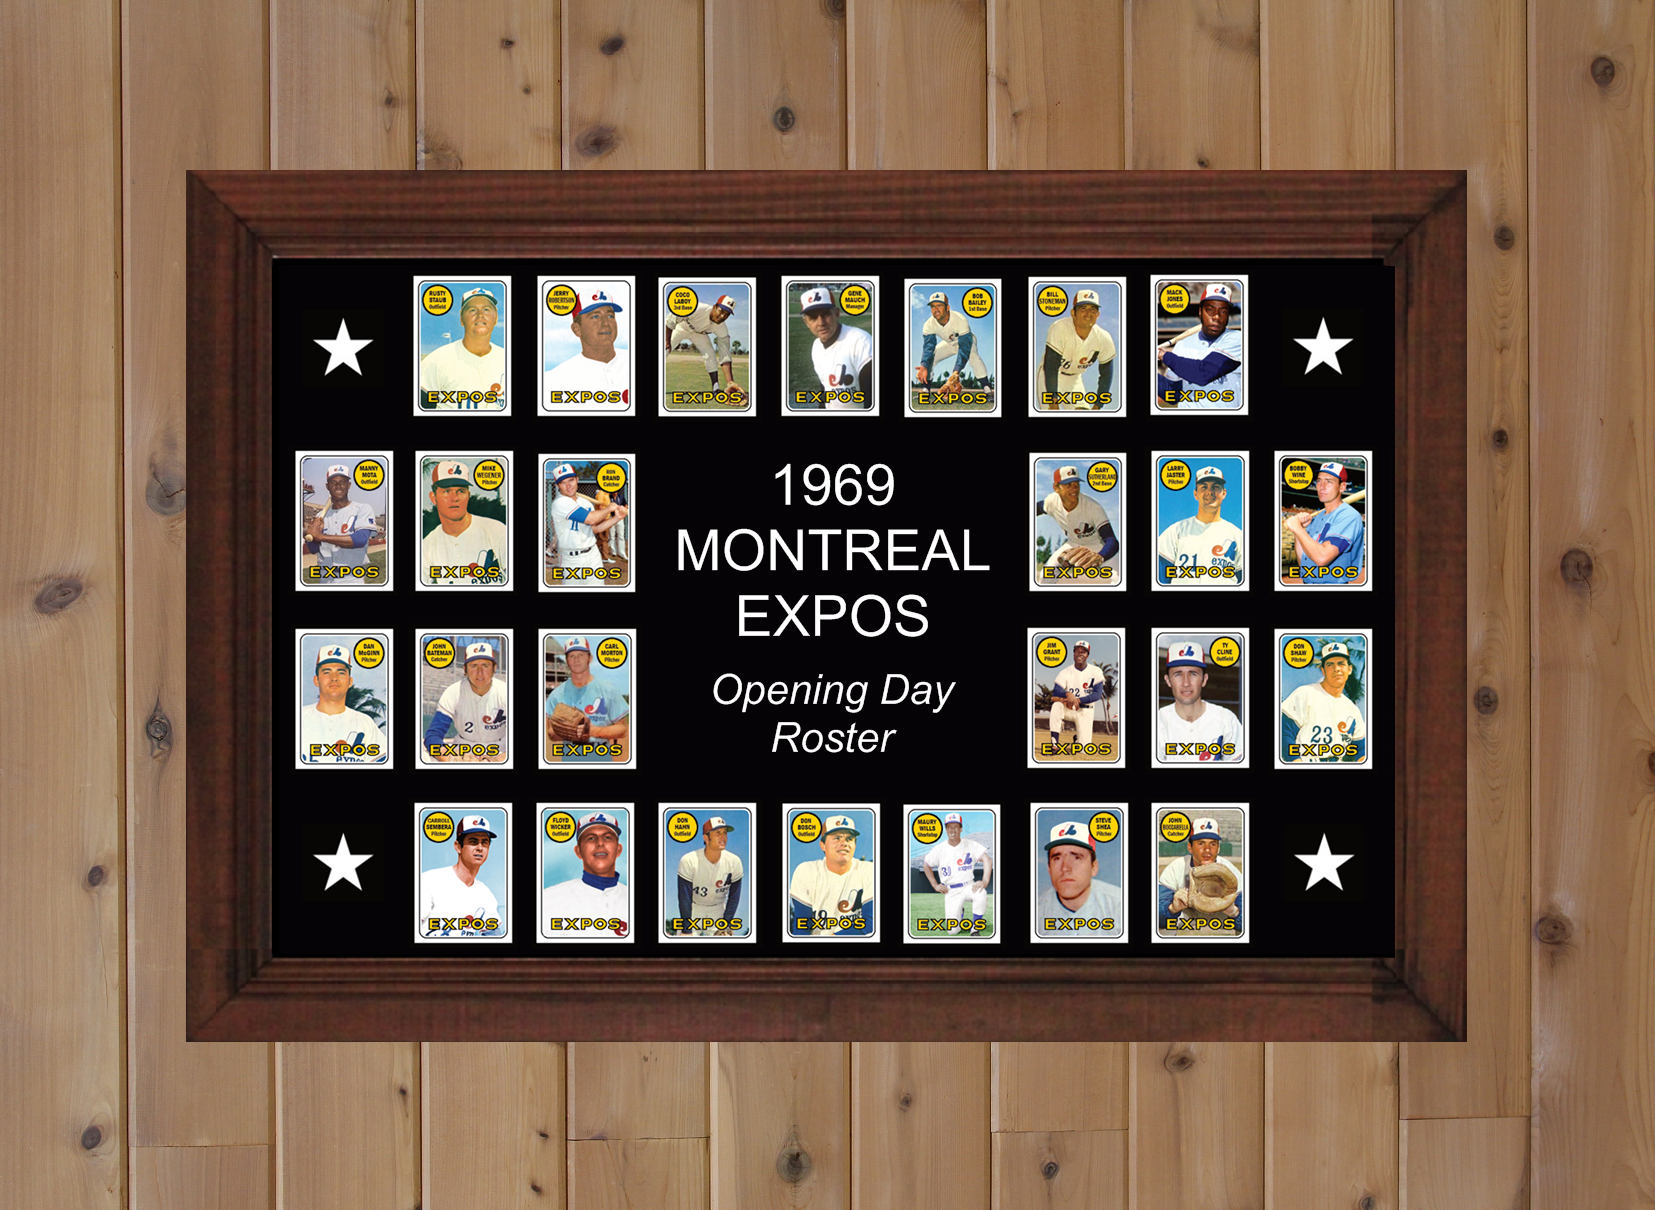 1969 MONTREAL EXPOS Poster Decor Gift Wall Art 1969 Opening photo